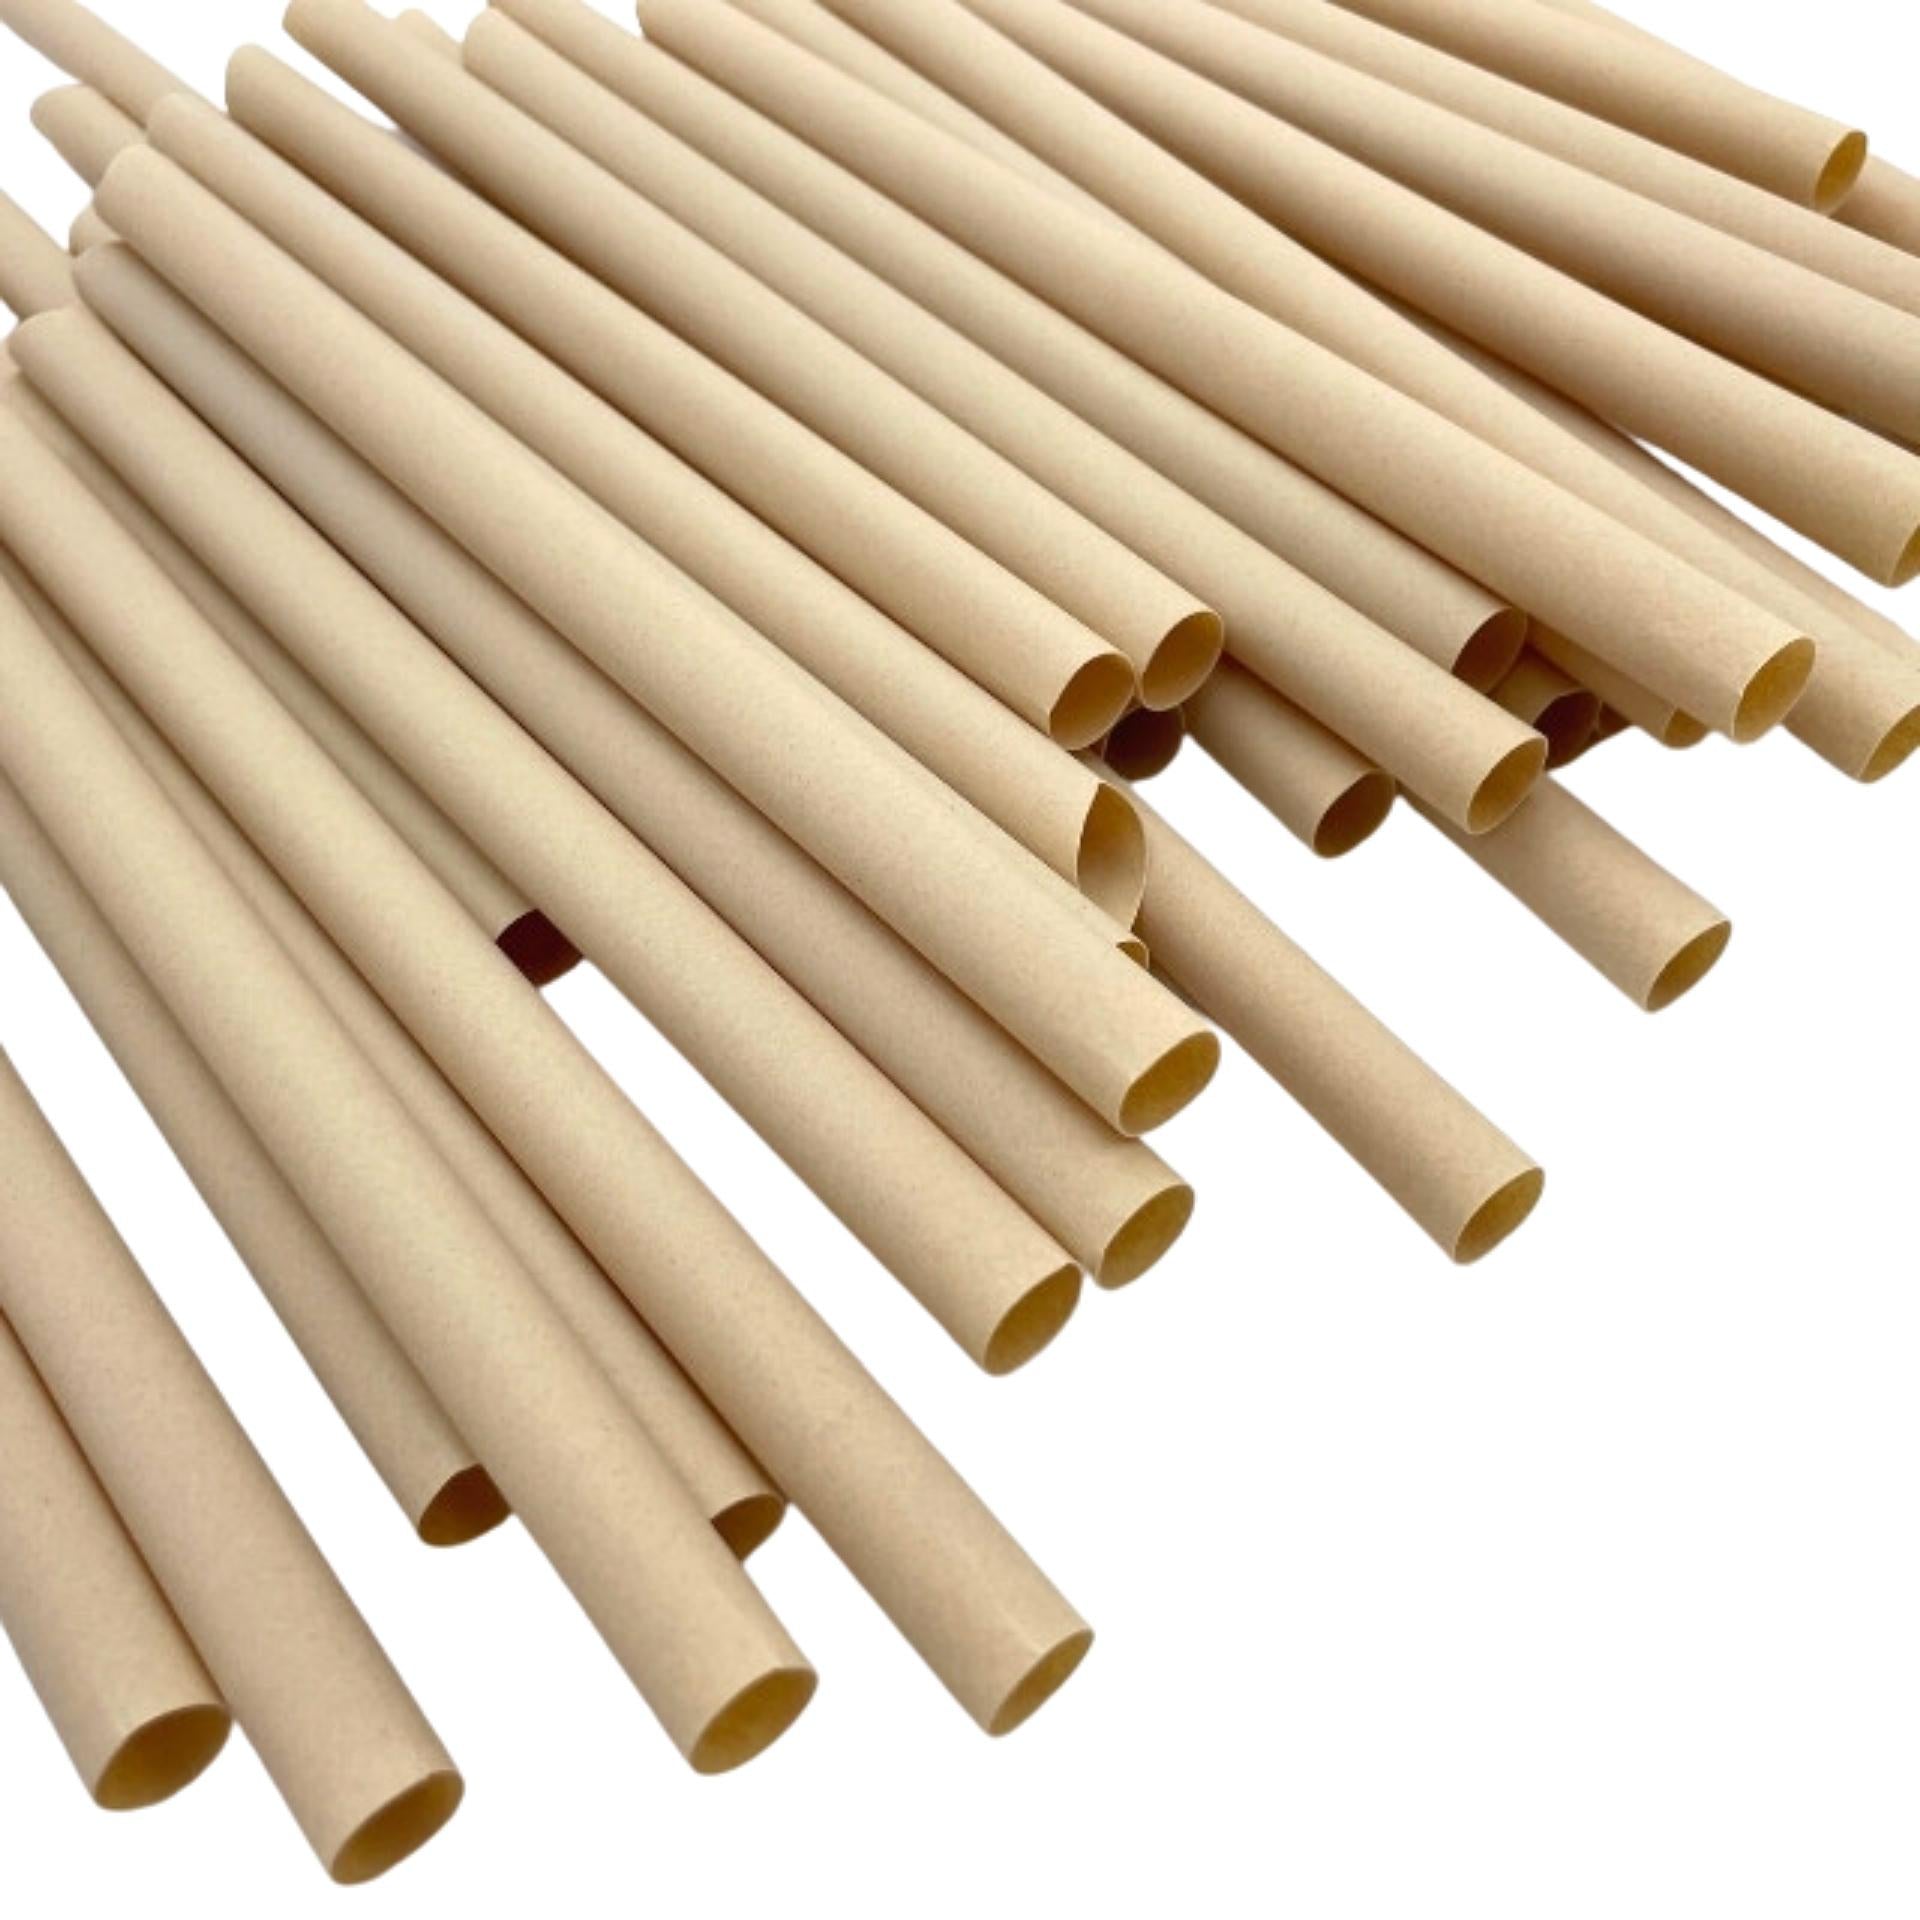 CHANYI Bamboo Straws 12mm - 100% Compostable Plant-Based Bamboo Fiber, Durable, Eco Friendly, Biodegradable & Disposable, for Drinking